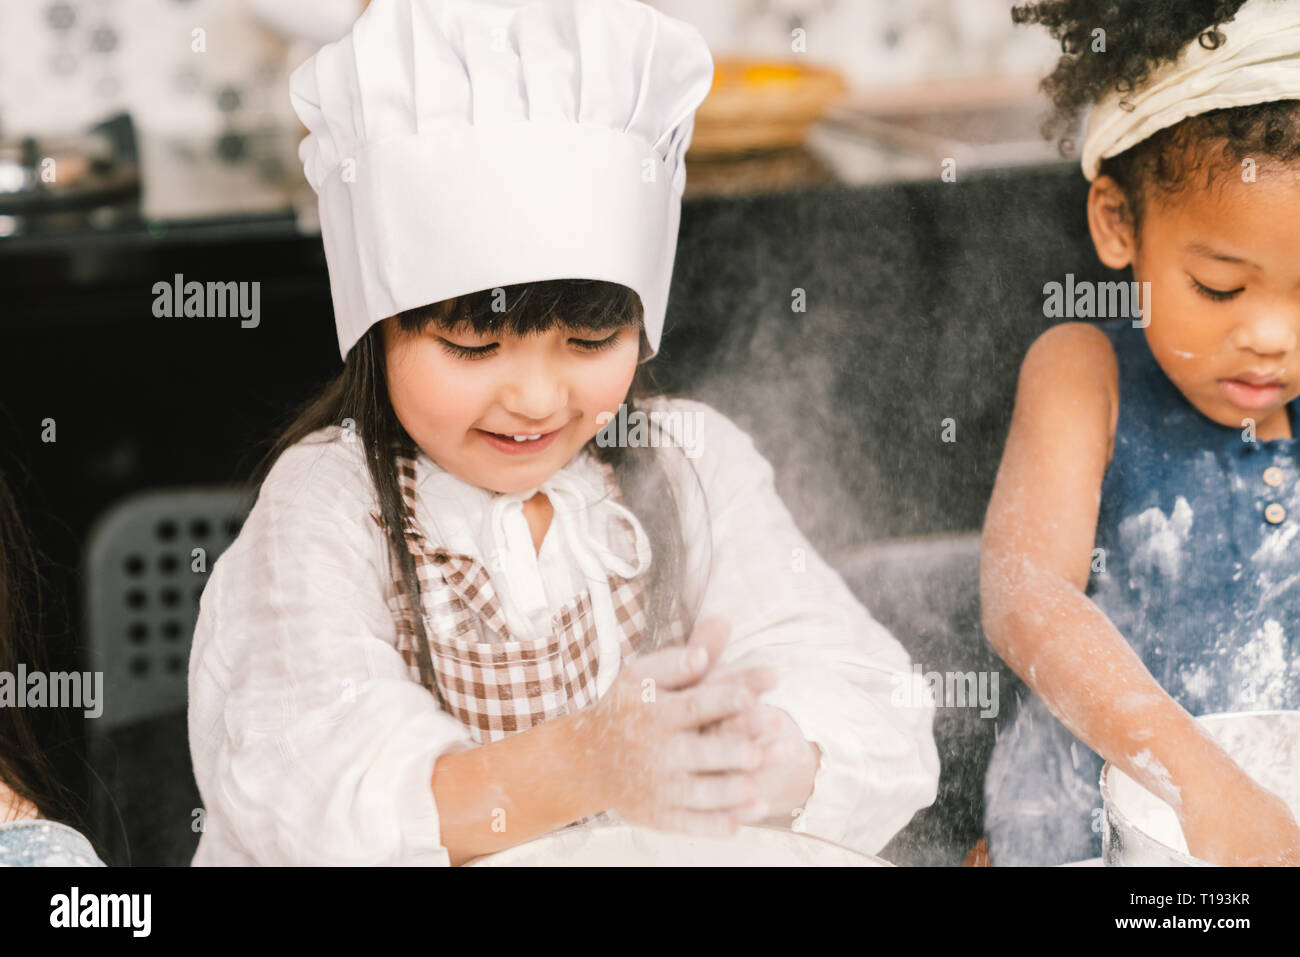 Cute mixed race and African American kid girls baking or cooking together in home kitchen. Education activity, youth culture, or smart young children  Stock Photo